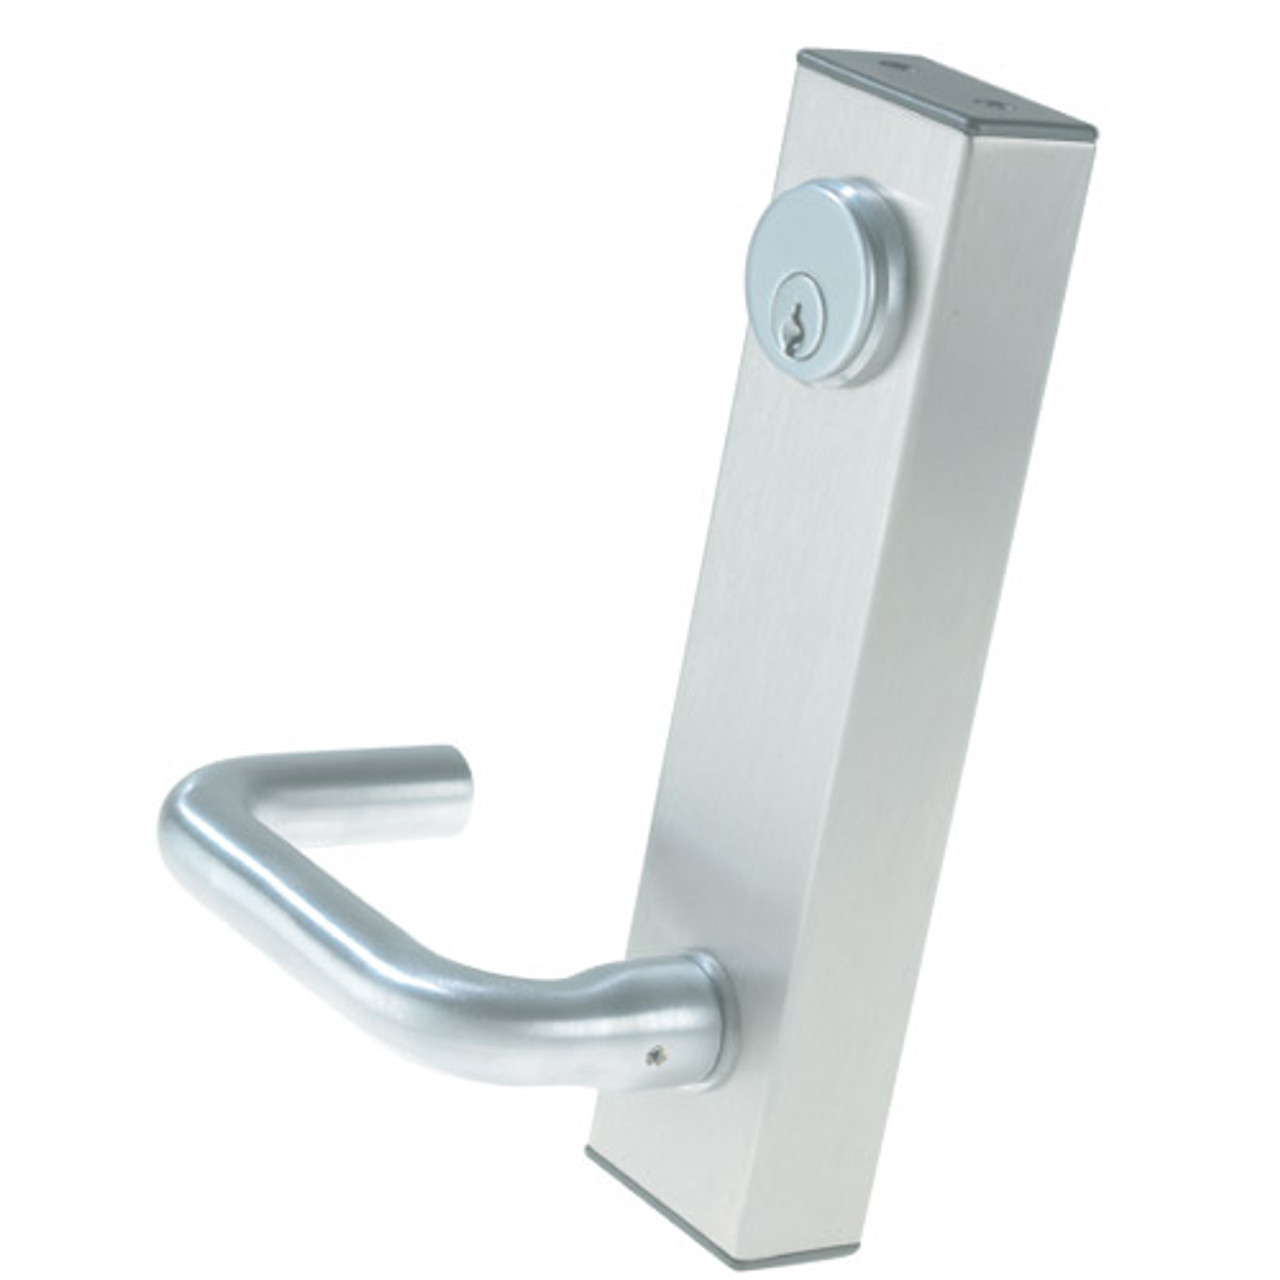 3080E-02-0-34-30 US32 Adams Rite Electrified Entry Trim with Round Lever in Bright Stainless Finish